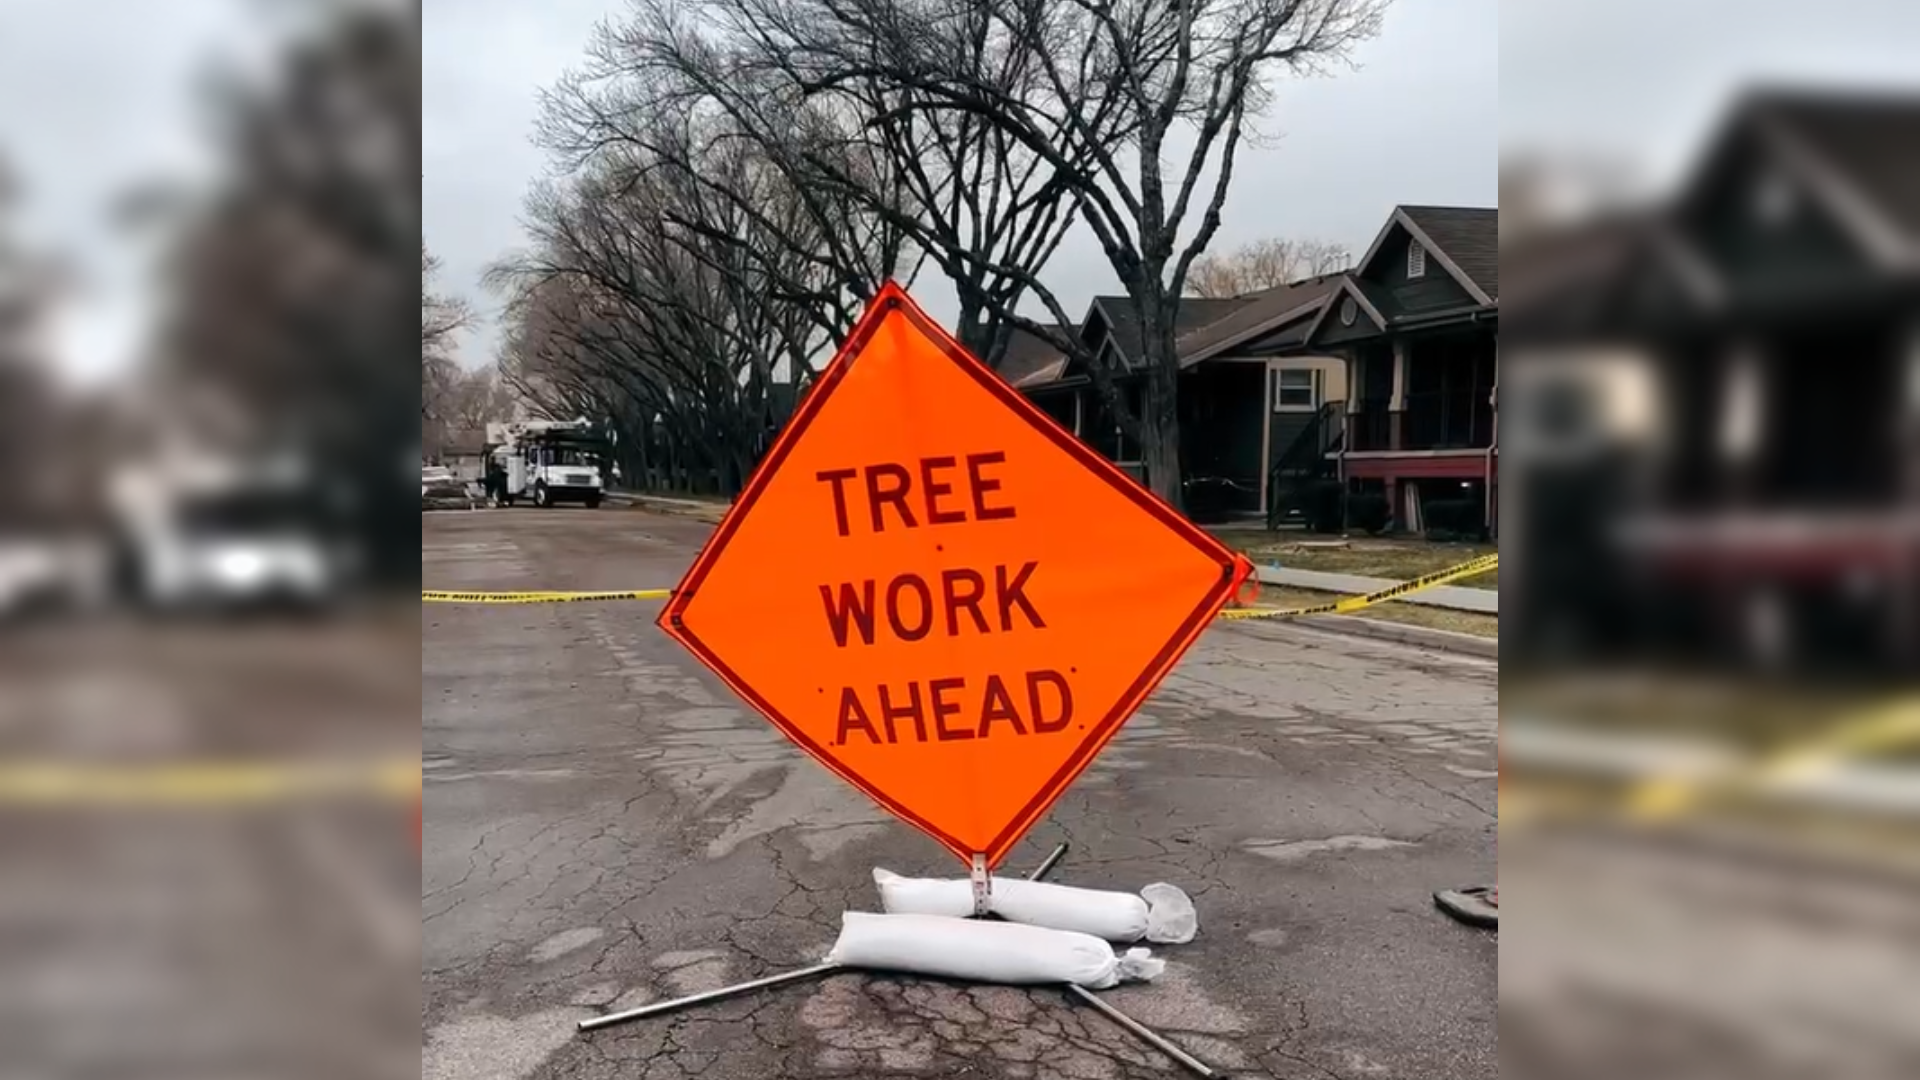 "tree work here" sign pictured on a rose park streed...